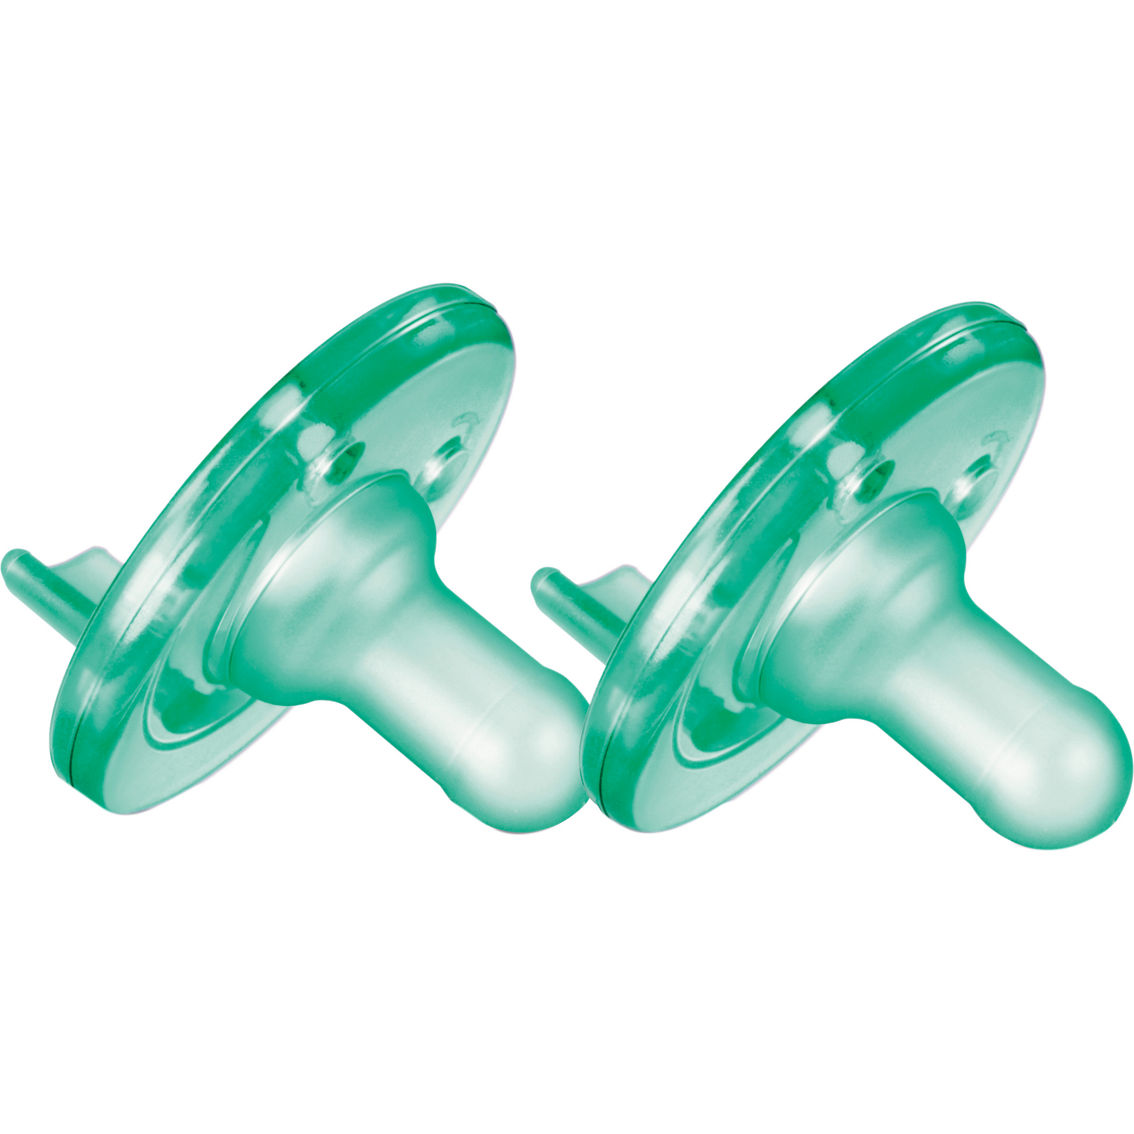 Philips Avent Soothie Pacifier 0-3m Green 2 pk. - Image 2 of 2